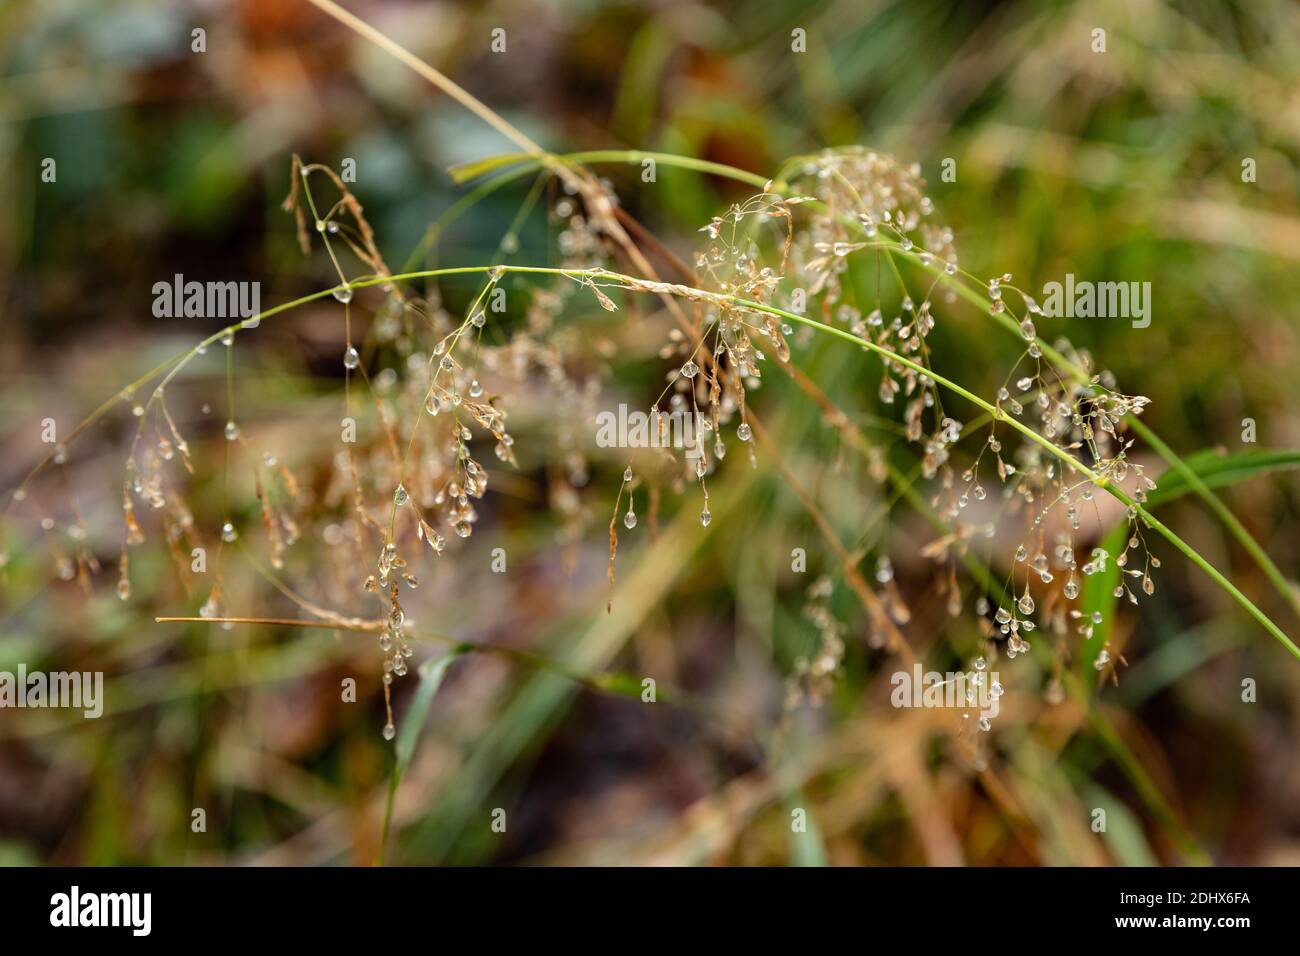 Droplets of rain hanging from grass in woodland yellow against green in mist Stock Photo